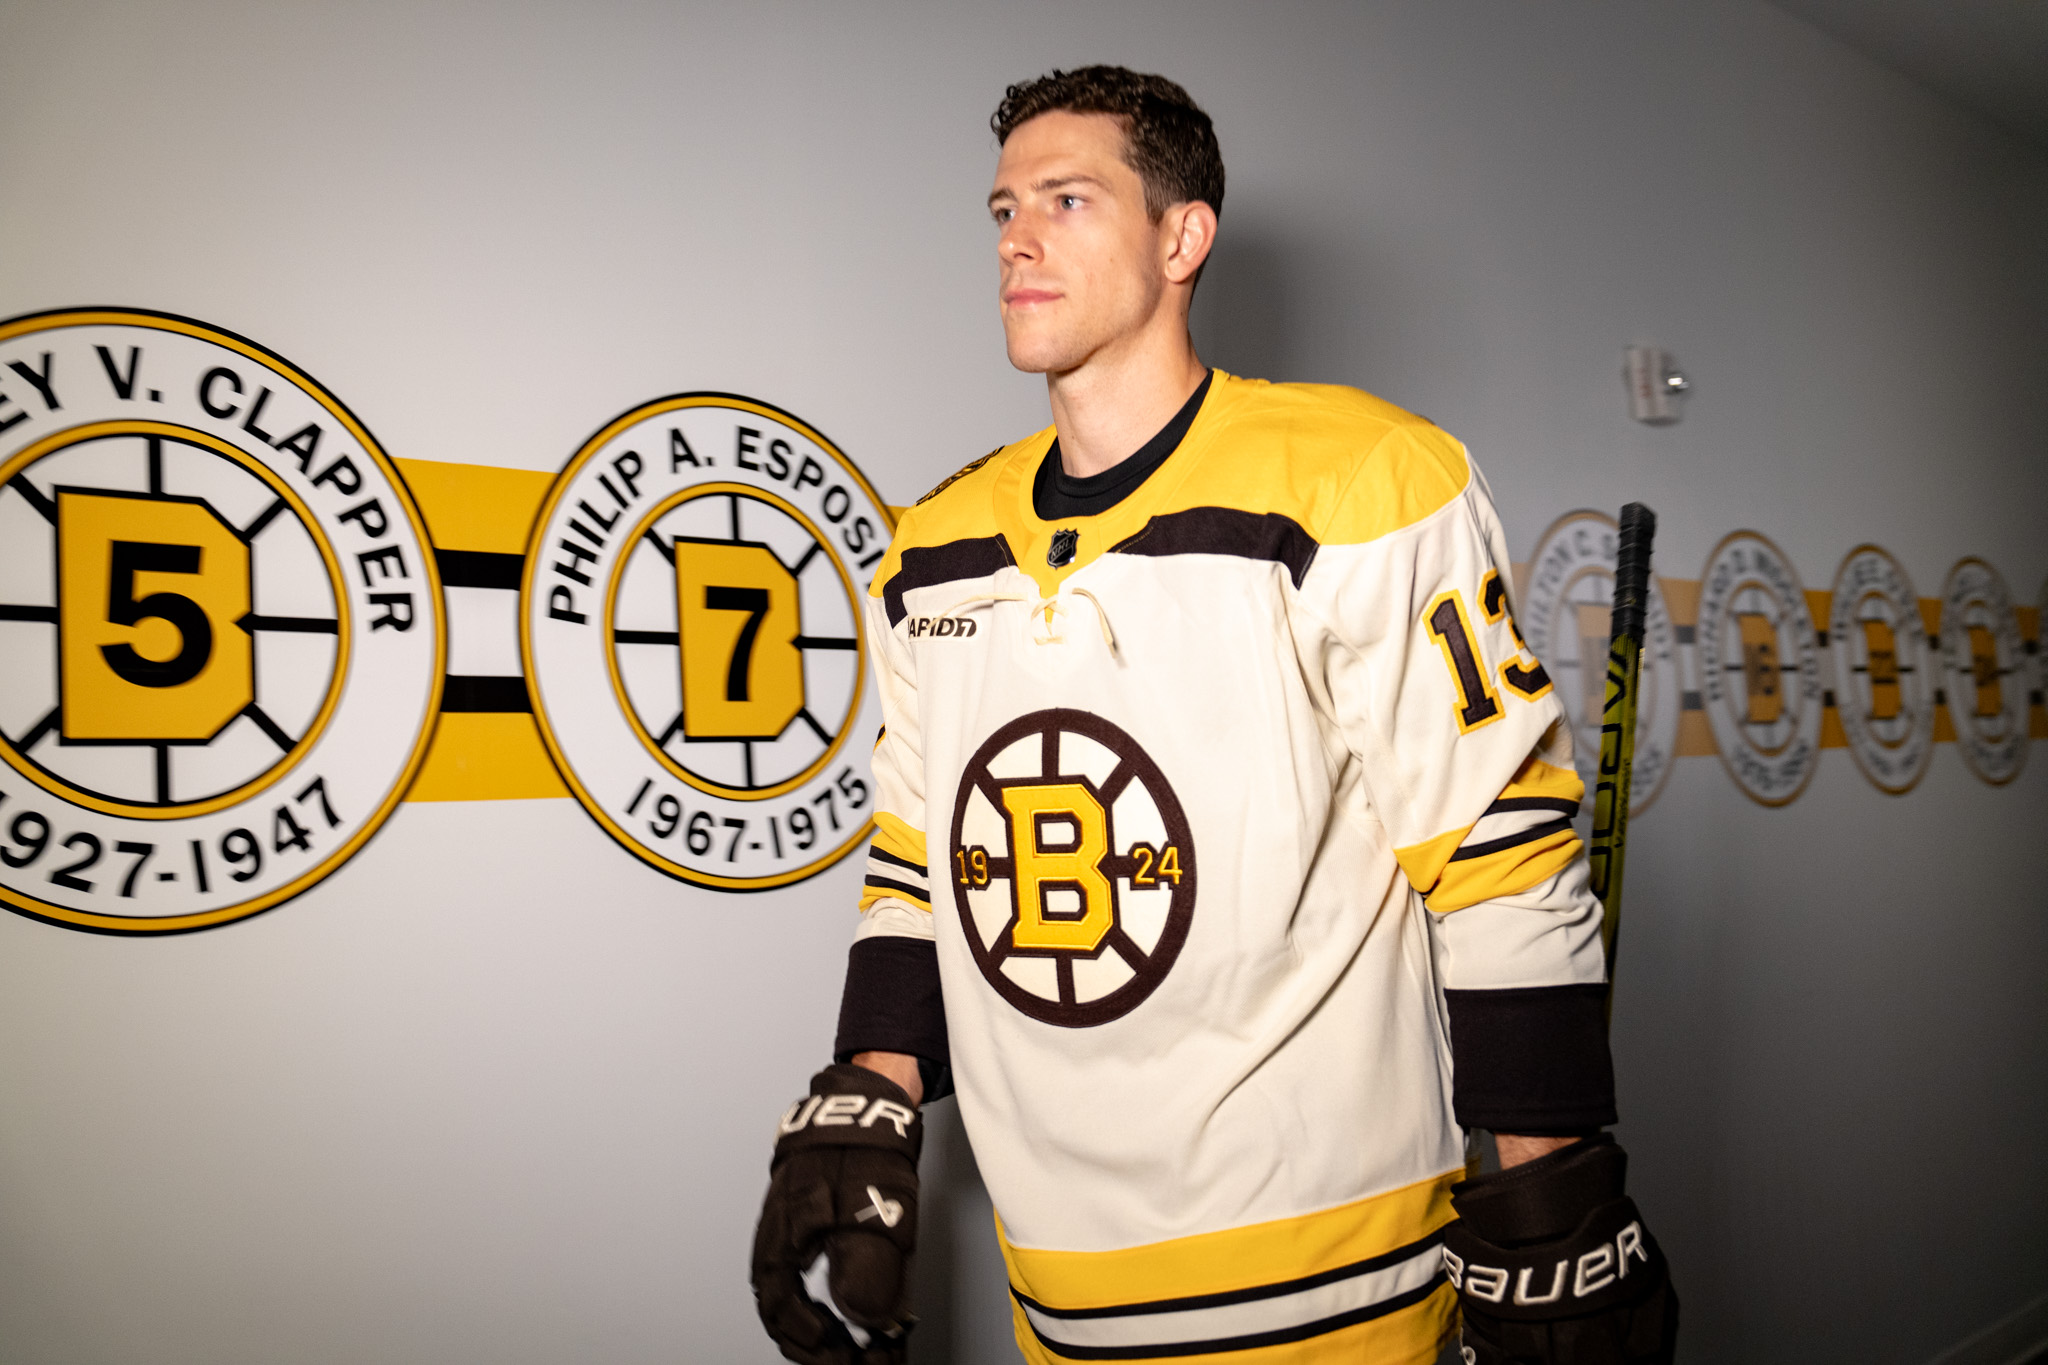 Conor Ryan on X: Another look at the new Rapid7 jersey patch for the Bruins:   / X